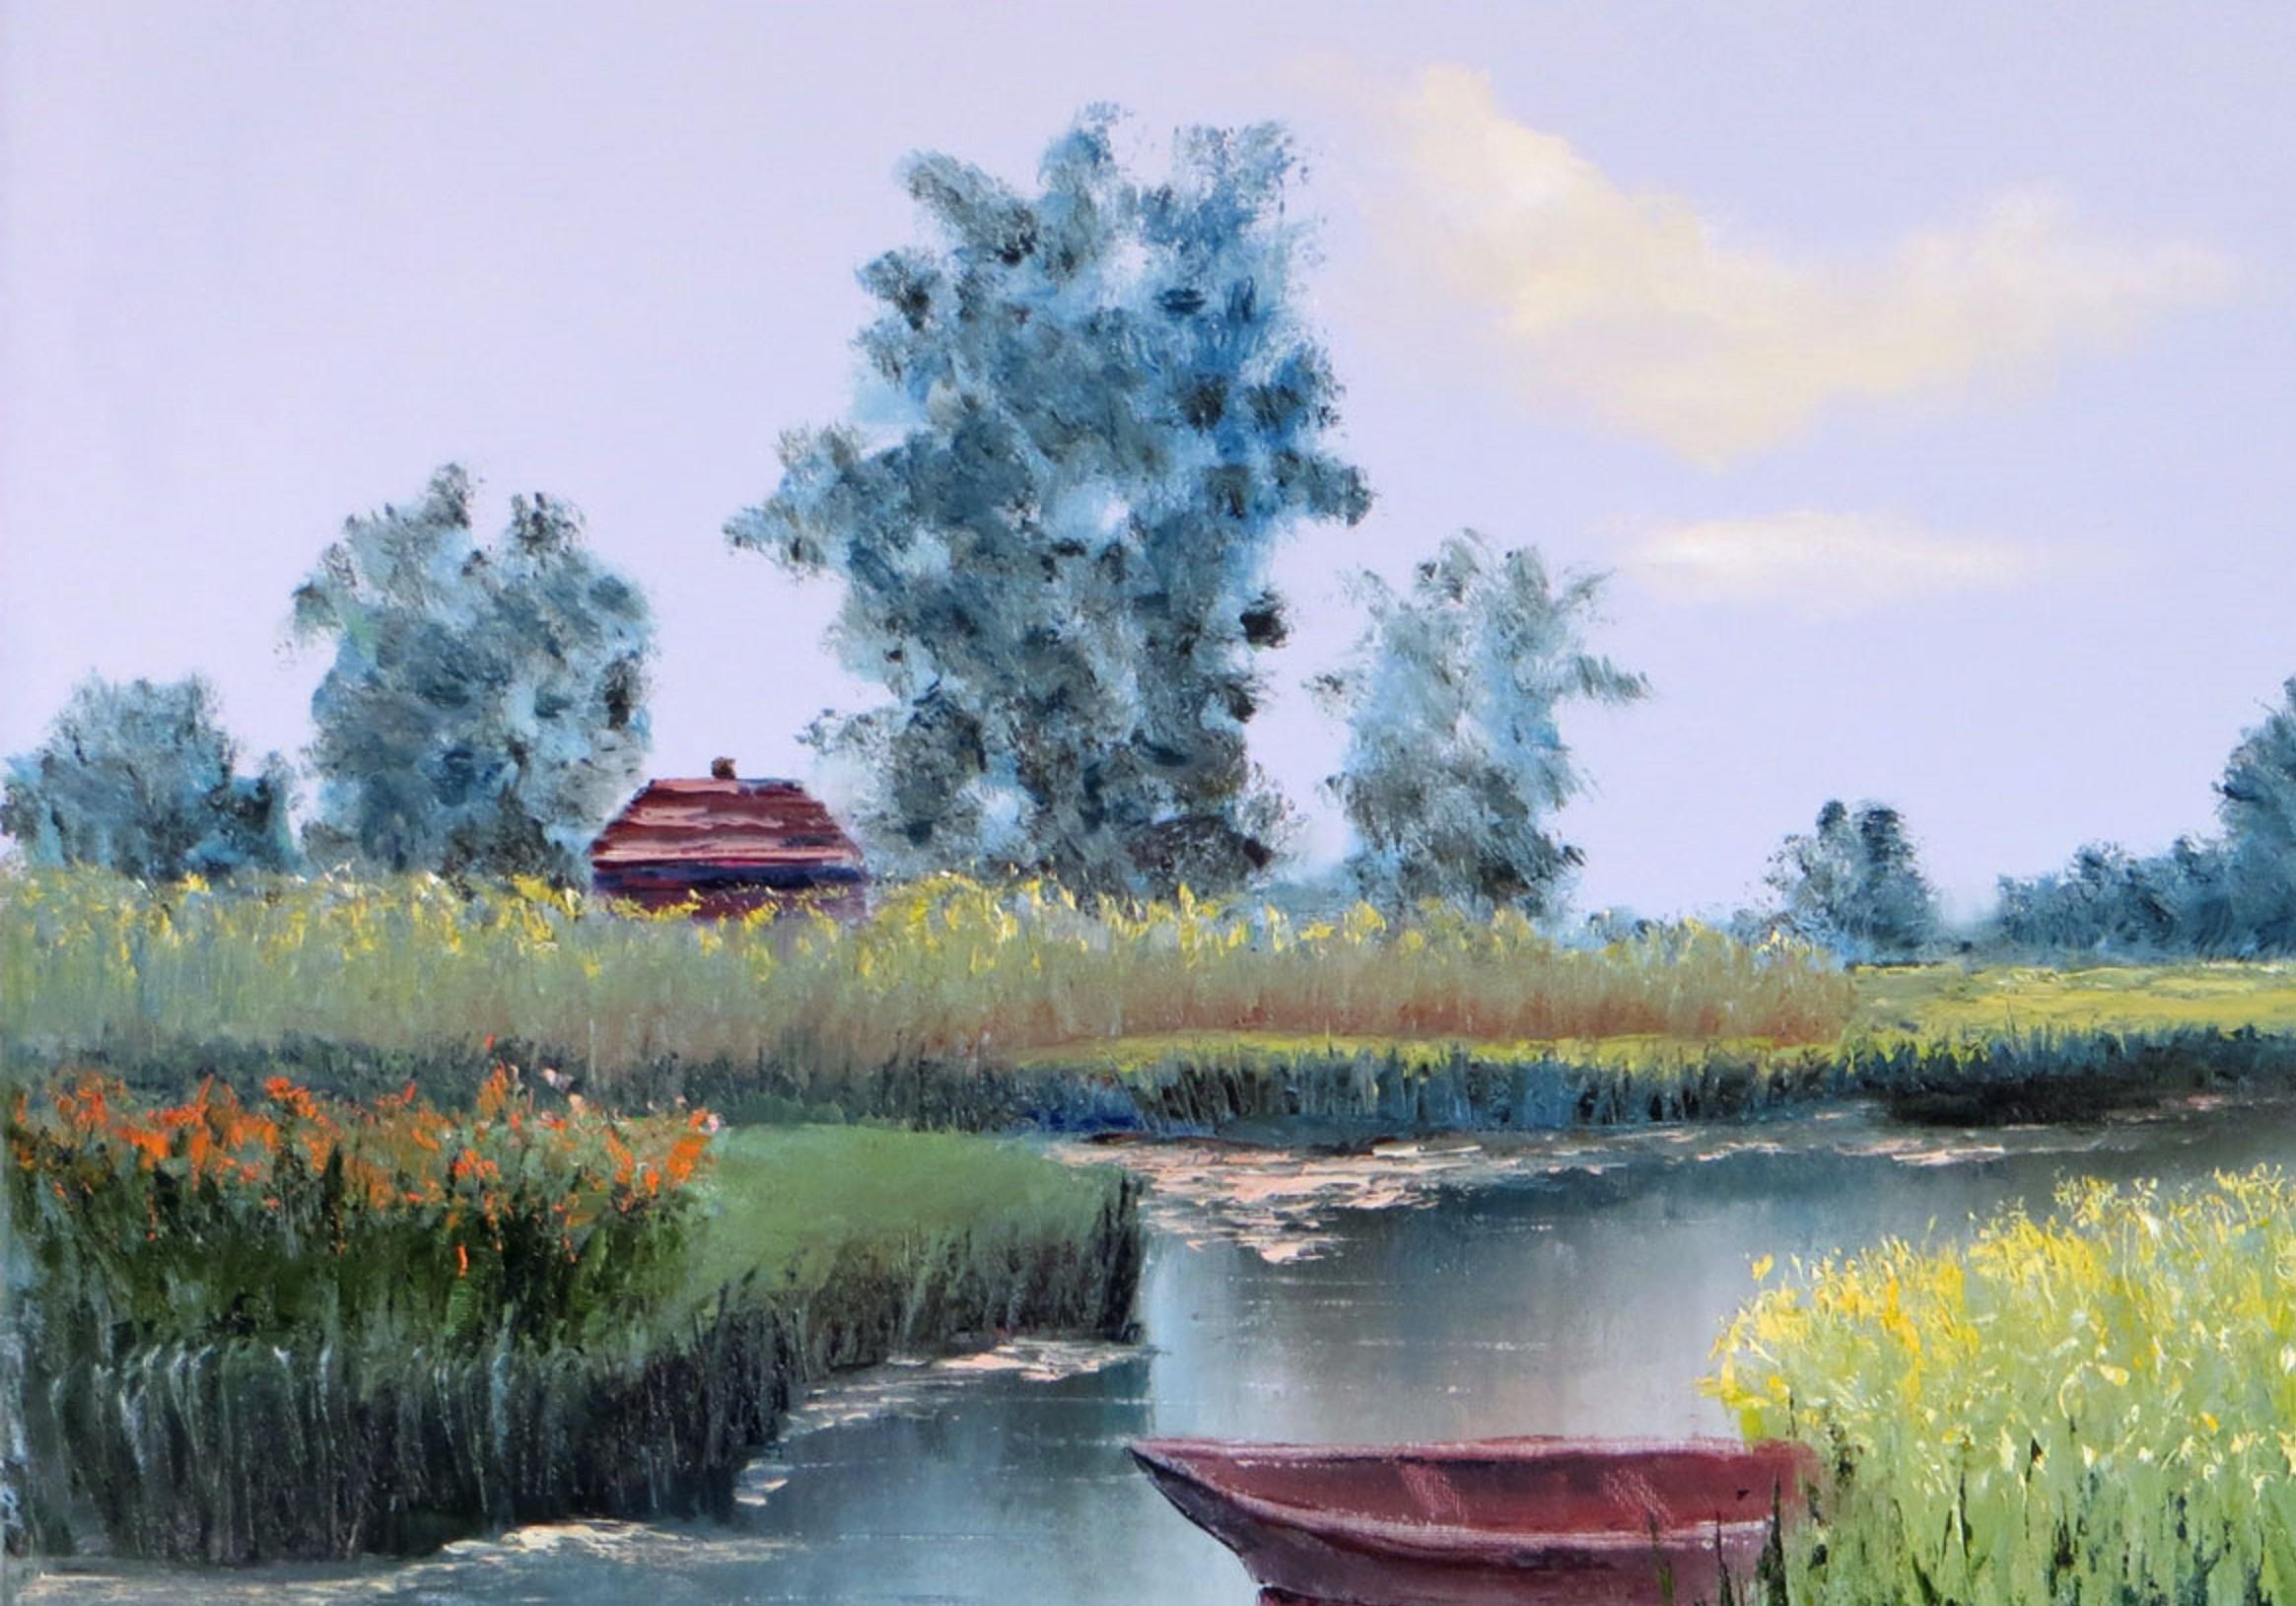 In this oil painting, I've woven tranquility with exuberant colors, capturing nature's quiet melody. I've layered impressionistic touches onto a realist framework, creating a dance of light across the serene waters. The small boat is a vessel for